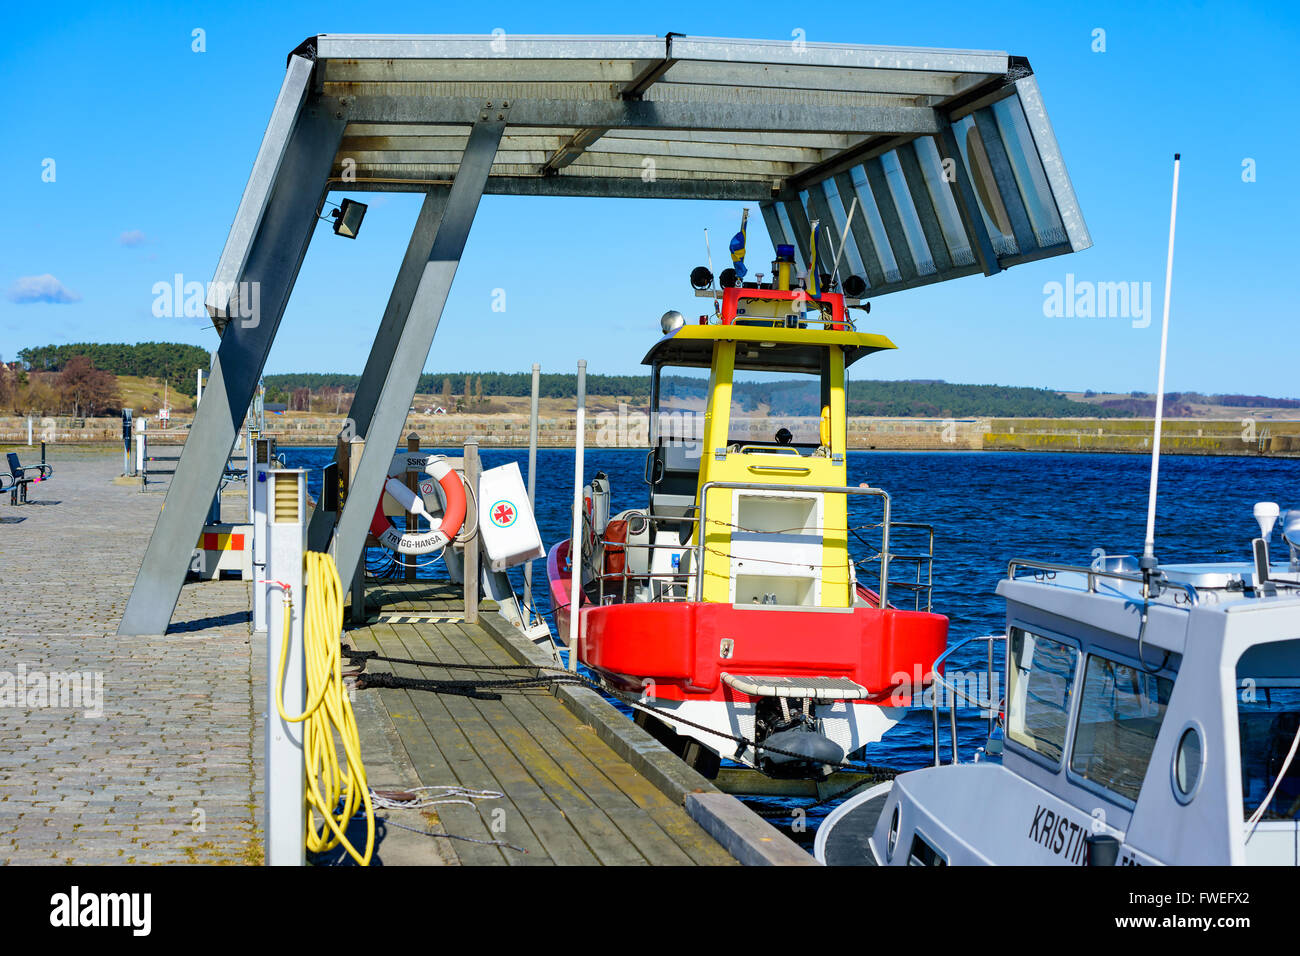 Kivik, Sweden - April 1, 2016: The Swedish Sea Rescue Society search and rescue boat moored or rather hoisted under a shelter in Stock Photo